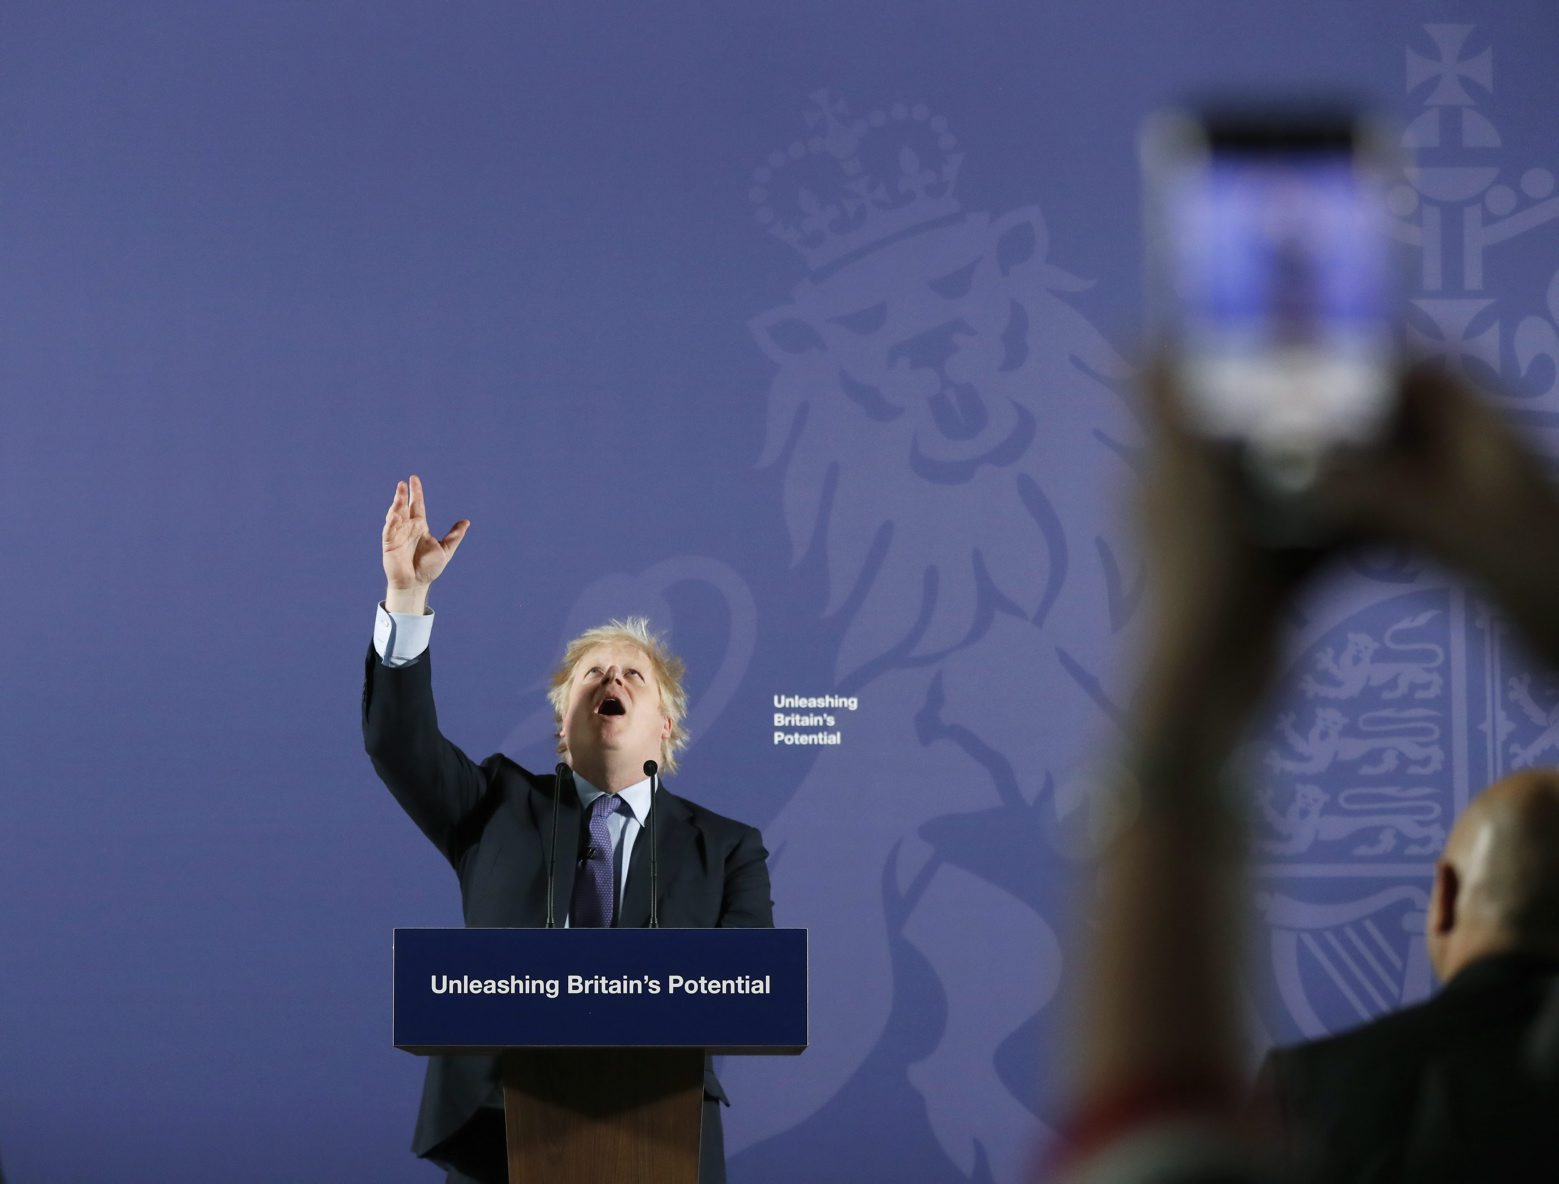 A guest takes images with his mobile phone as British Prime Minister Boris Johnson outlines his government's negotiating stance with the European Union after Brexit, during a key speech at the Old Naval College in Greenwich, London, Monday, Feb. 3, 2020. (AP Photo/Frank Augstein, Pool)
Boris Johnson Britain Brexit